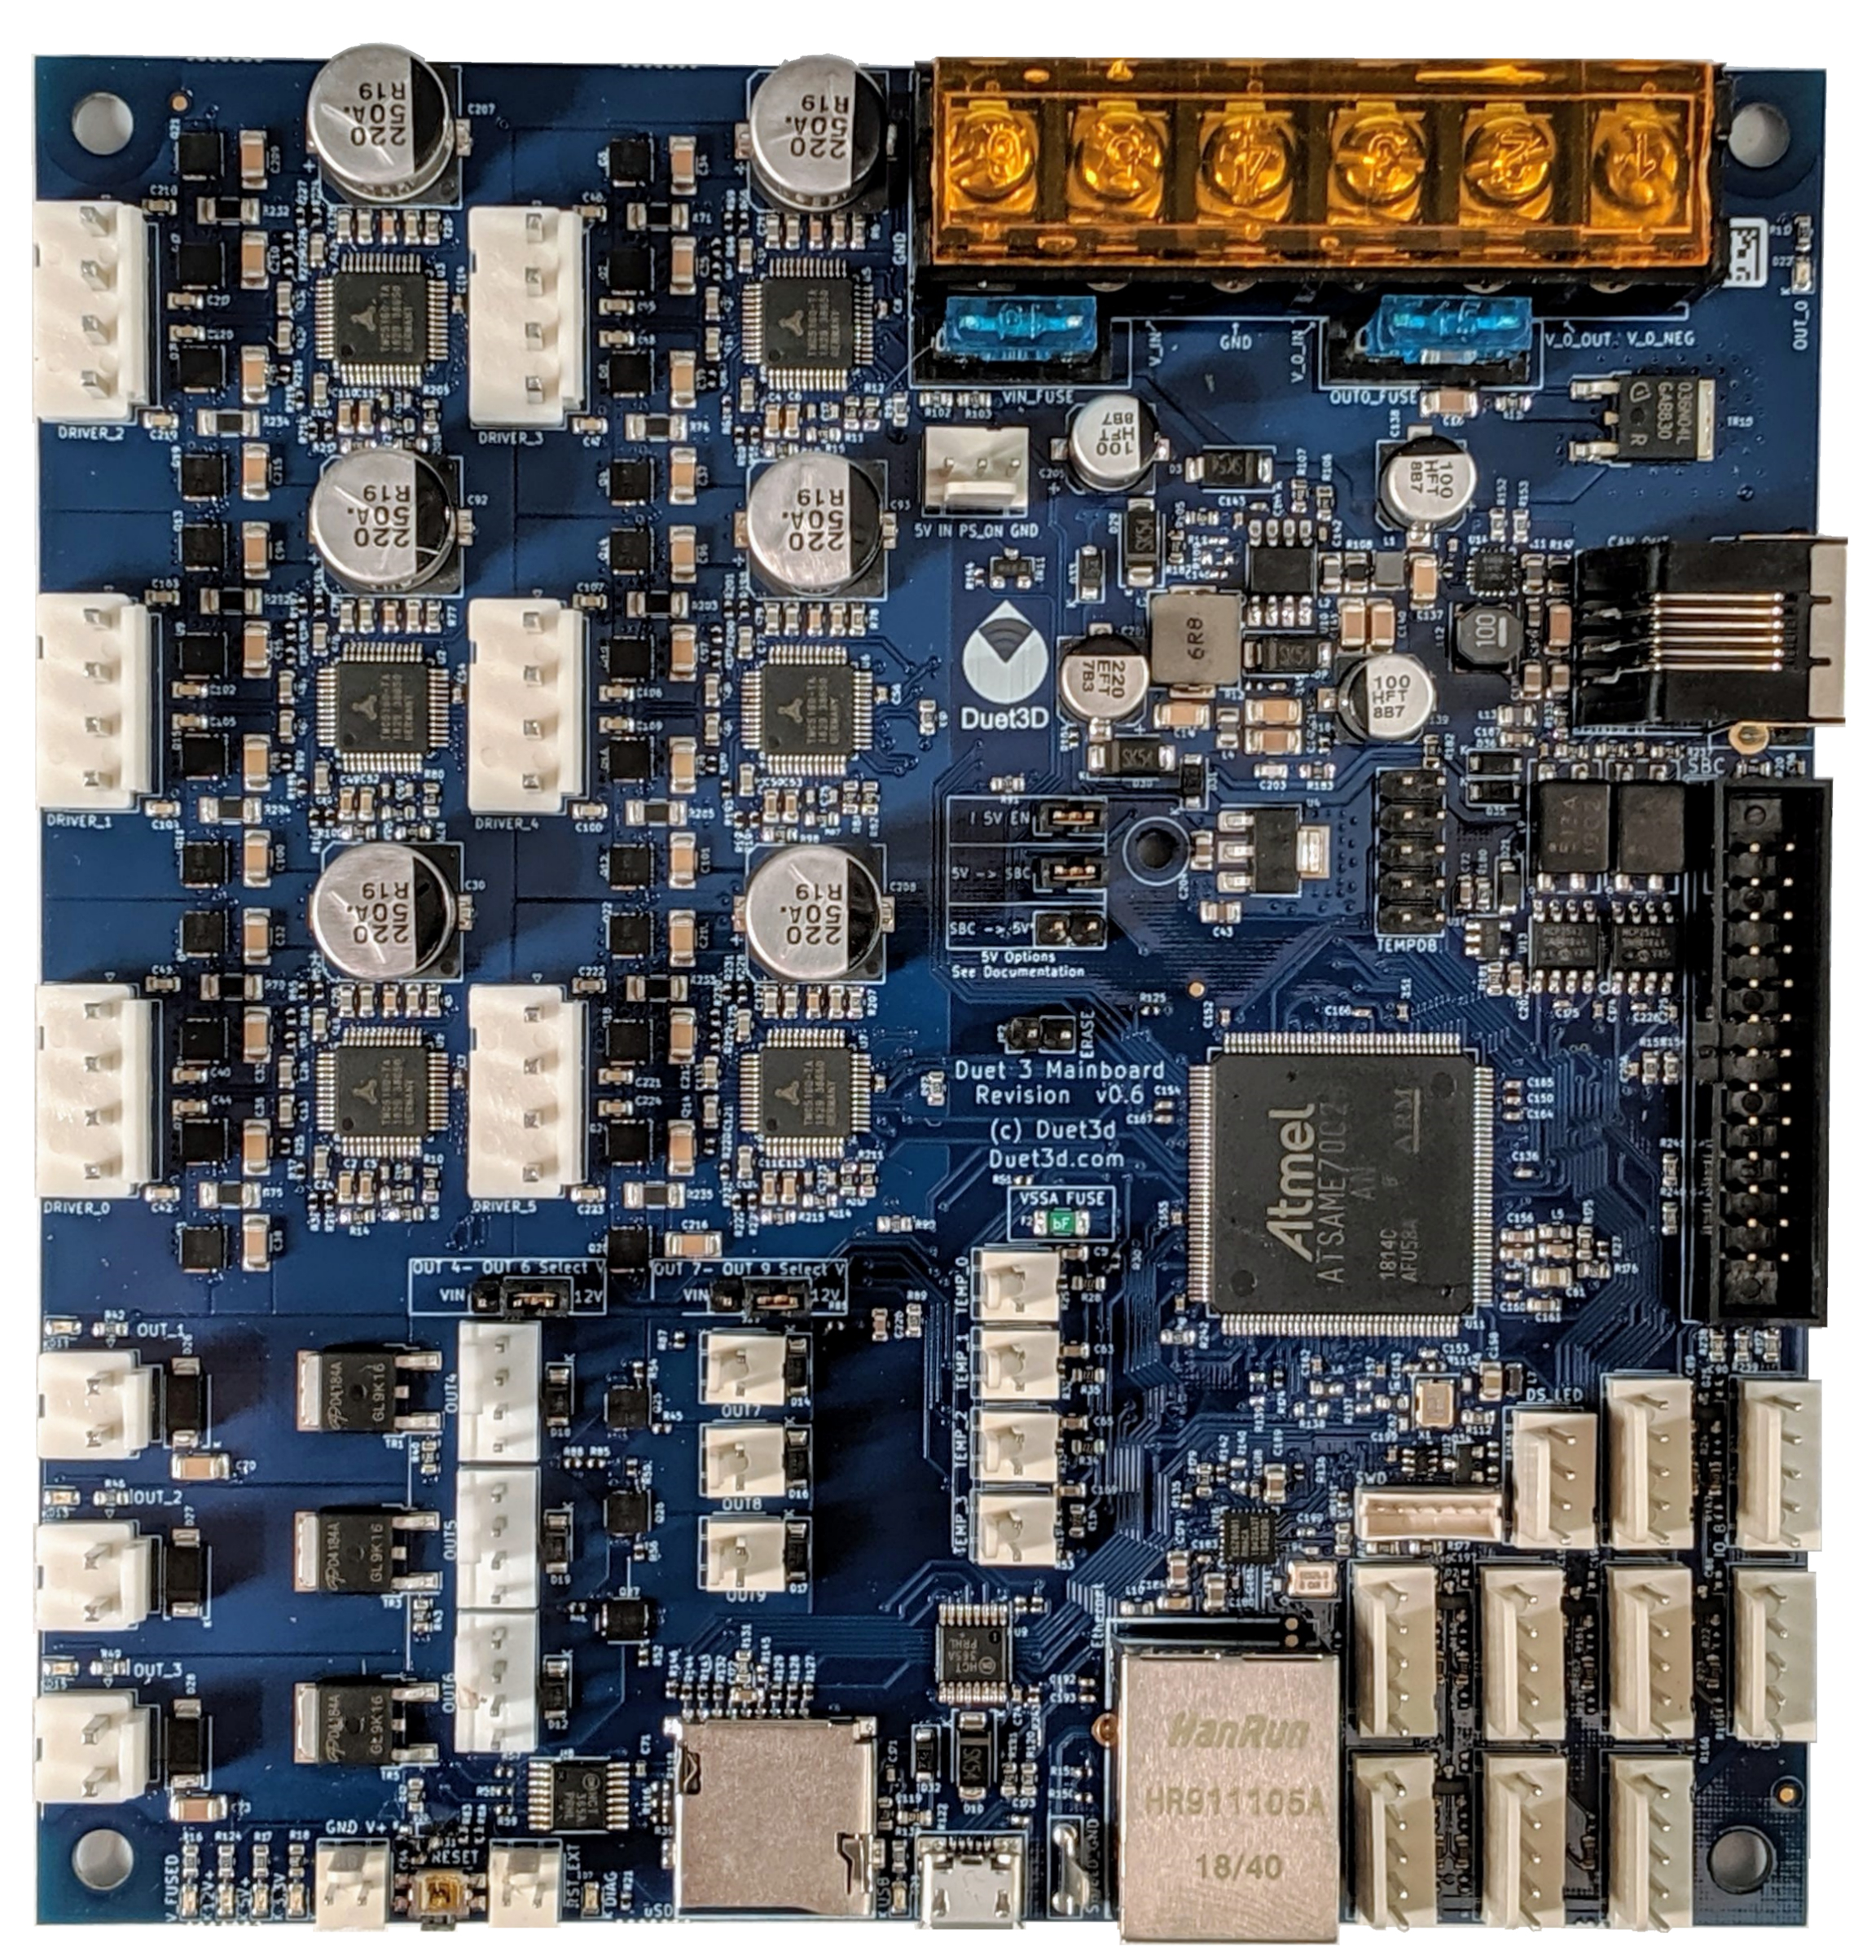 Getting Started with Duet 3 Mainboard 6HC